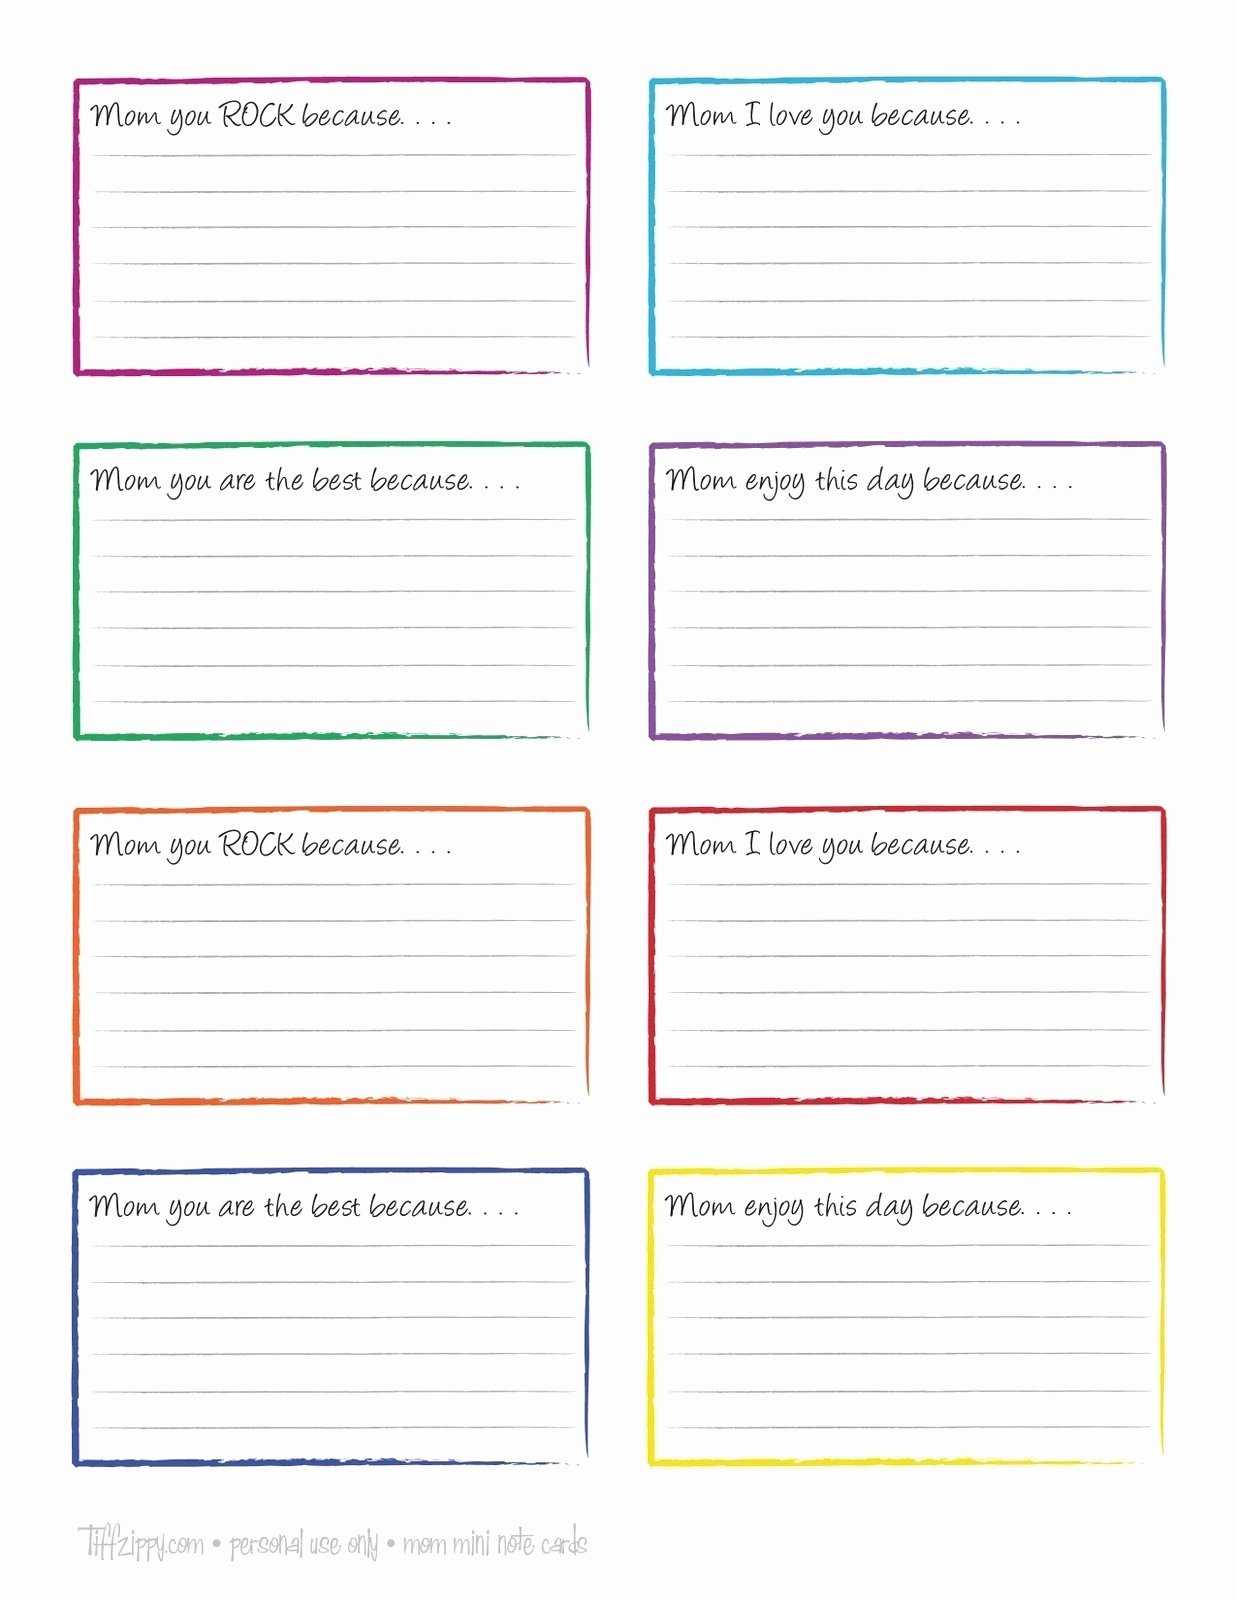 30 Note Card Template Google Docs | Pryncepality With Index Card Template For Word